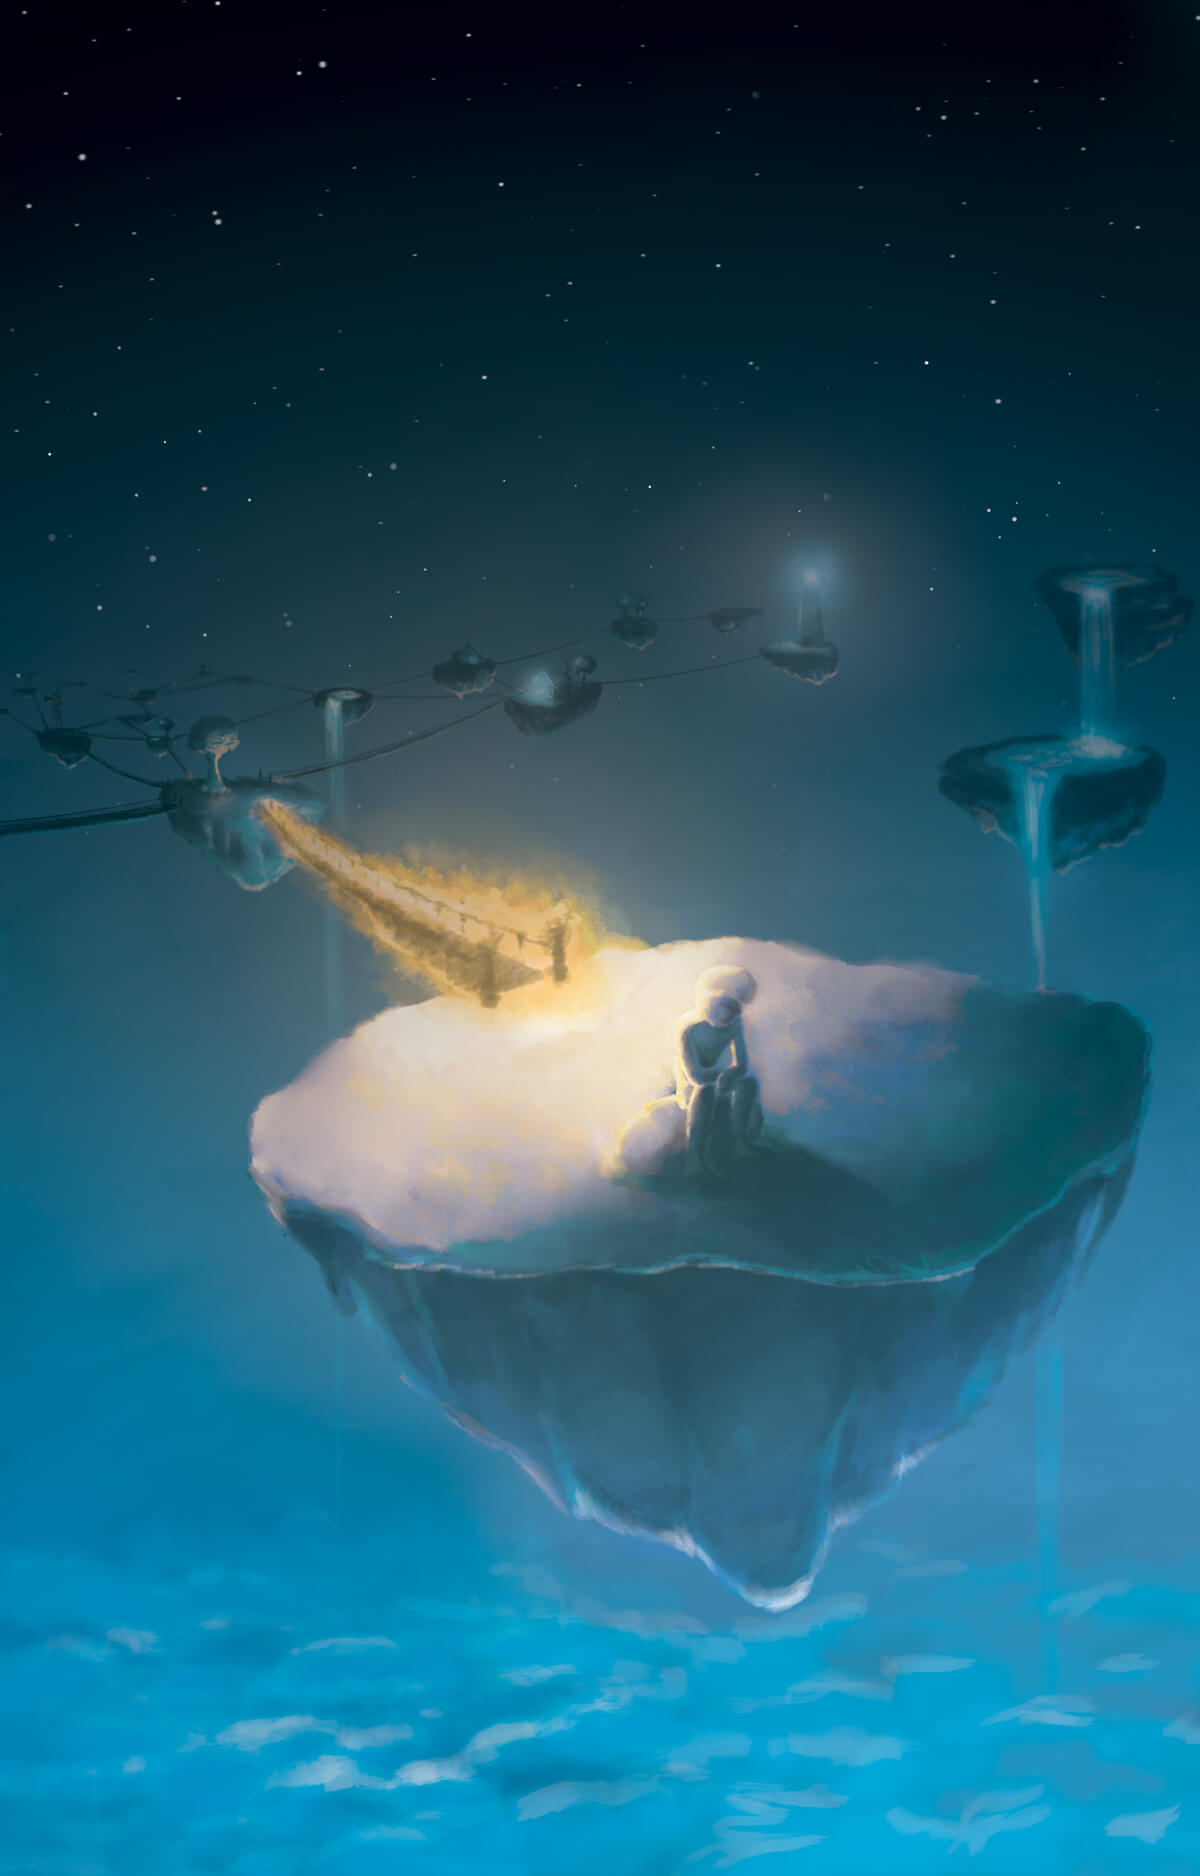 High above the clouds in a starry night sky, a solitary figure sits alone on a floating island, looking down, back turned to the burning bridge behind.